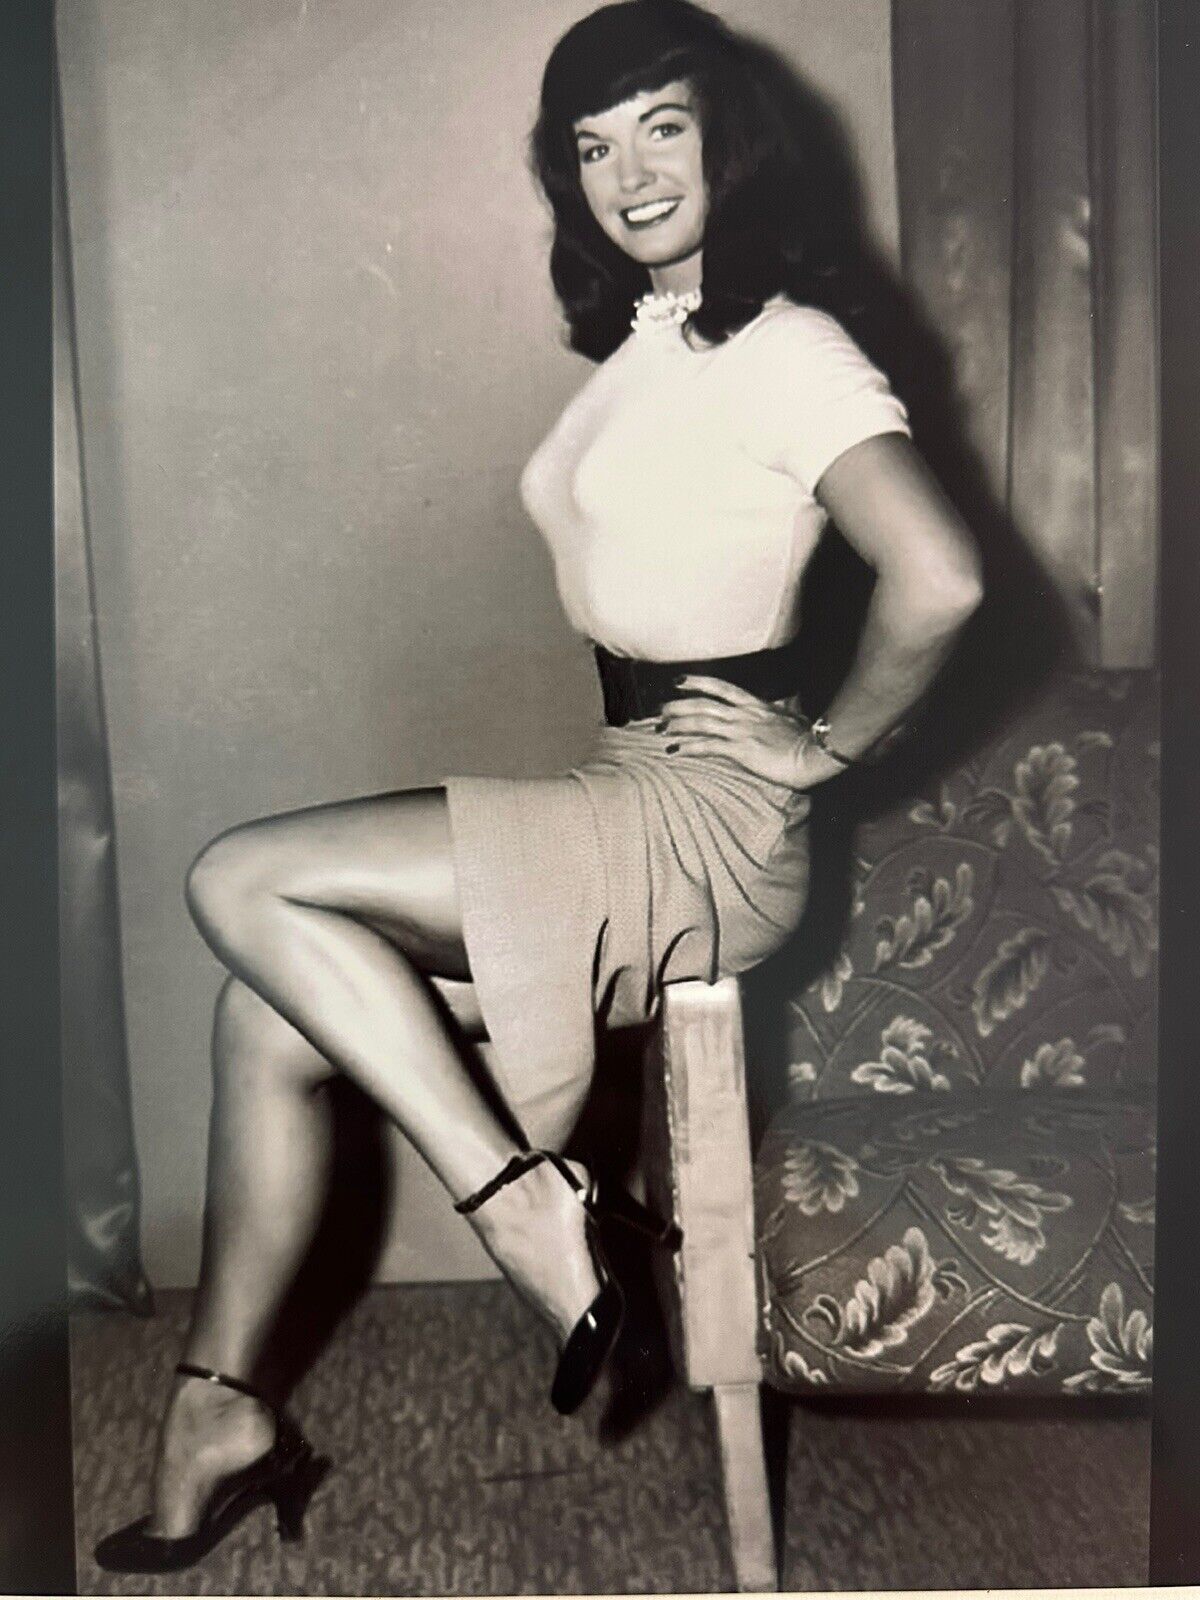 Bettie Page Photo 8X10 Original Type 2 Pinup Sexy Risque - Sitting Perky